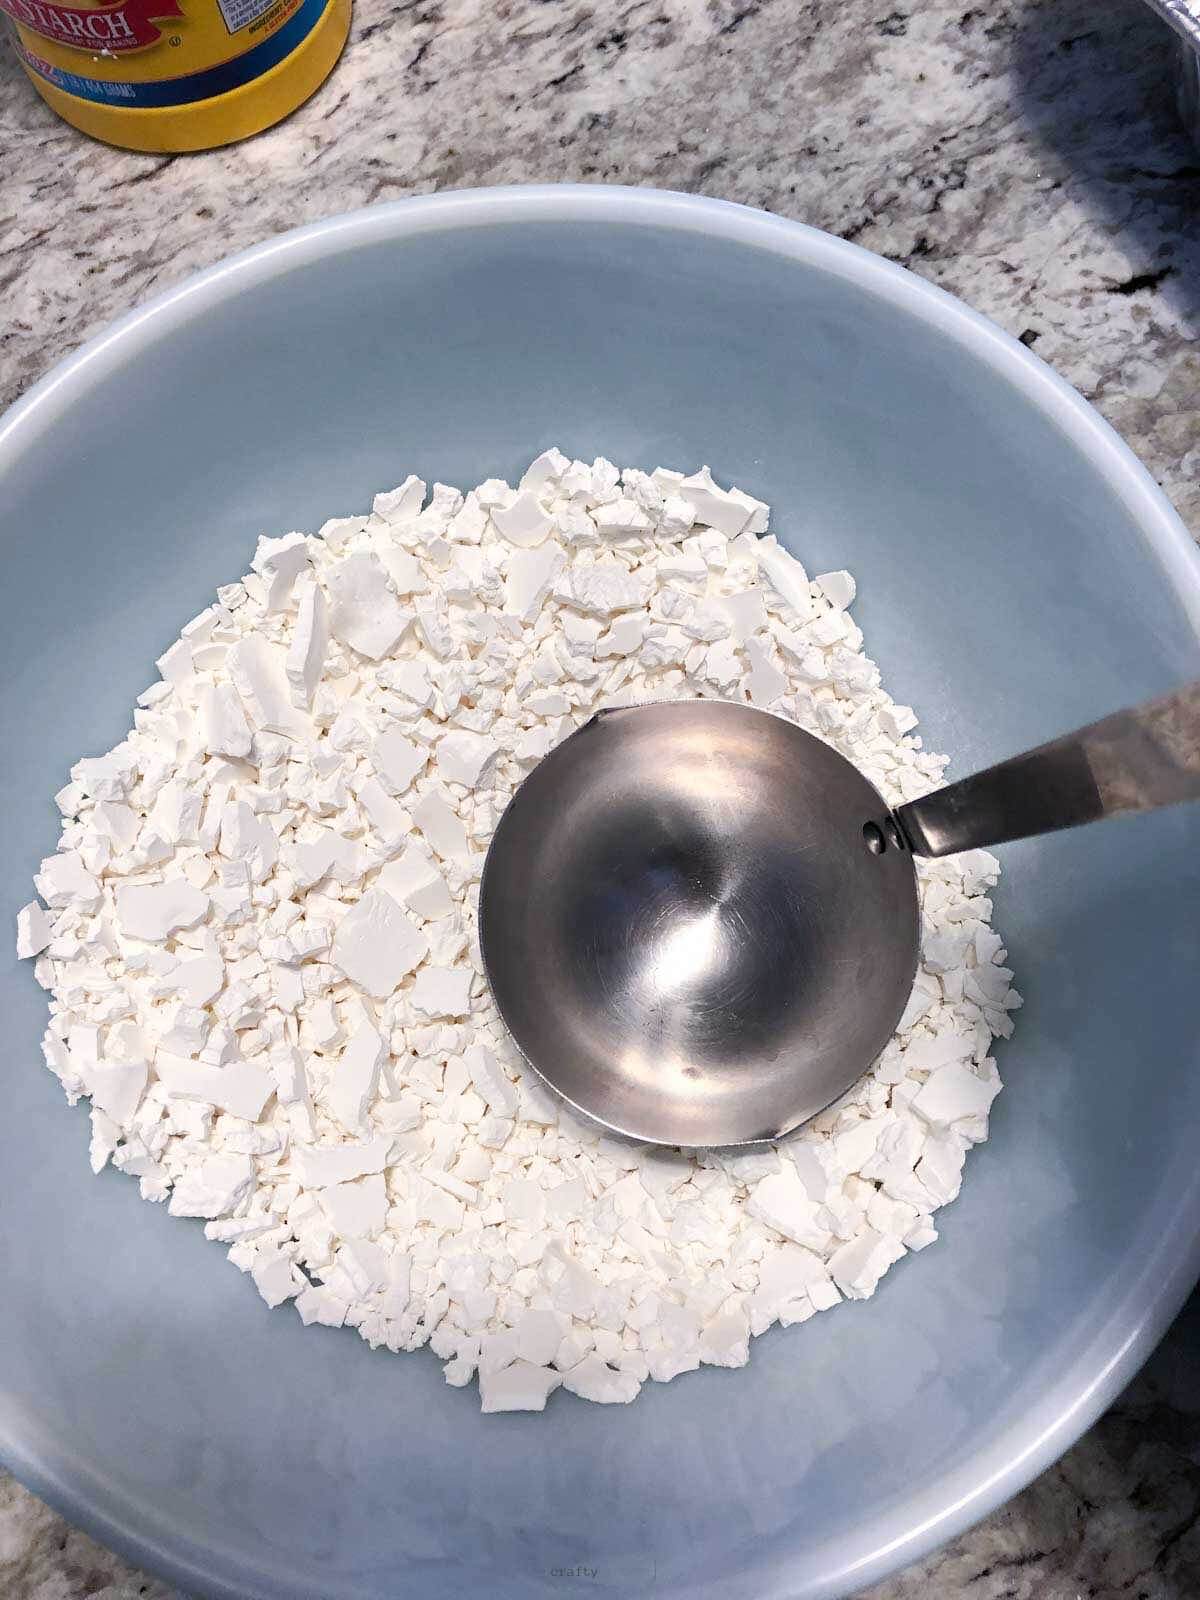 3 cups of corn starch in mixing bowl with spoon.